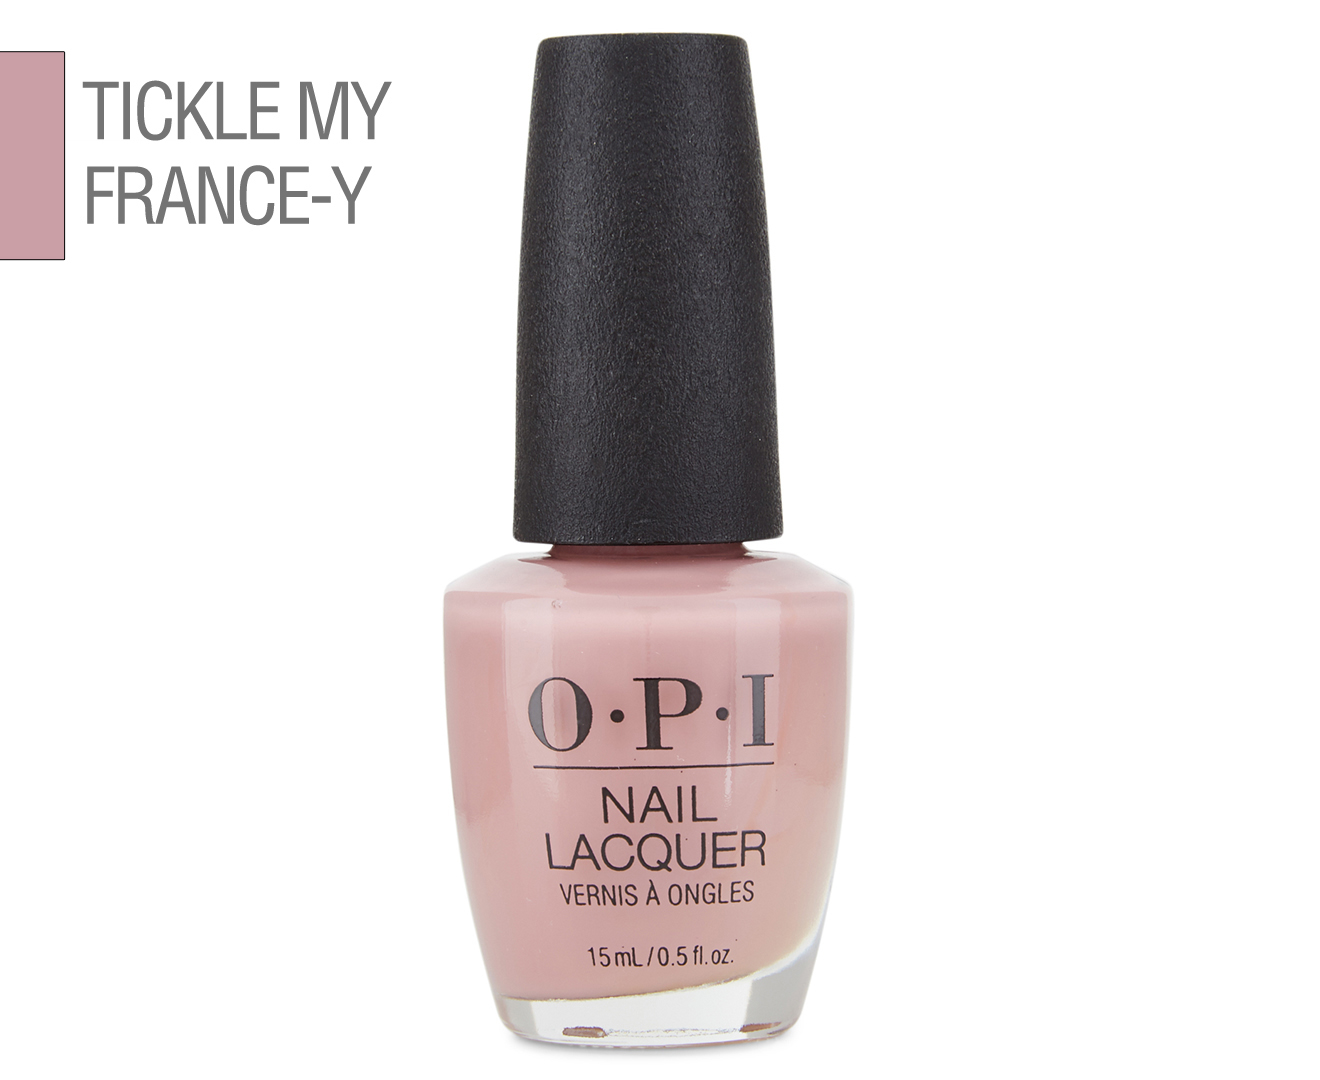 3. OPI "Tickle My France-y" Nail Polish - wide 1